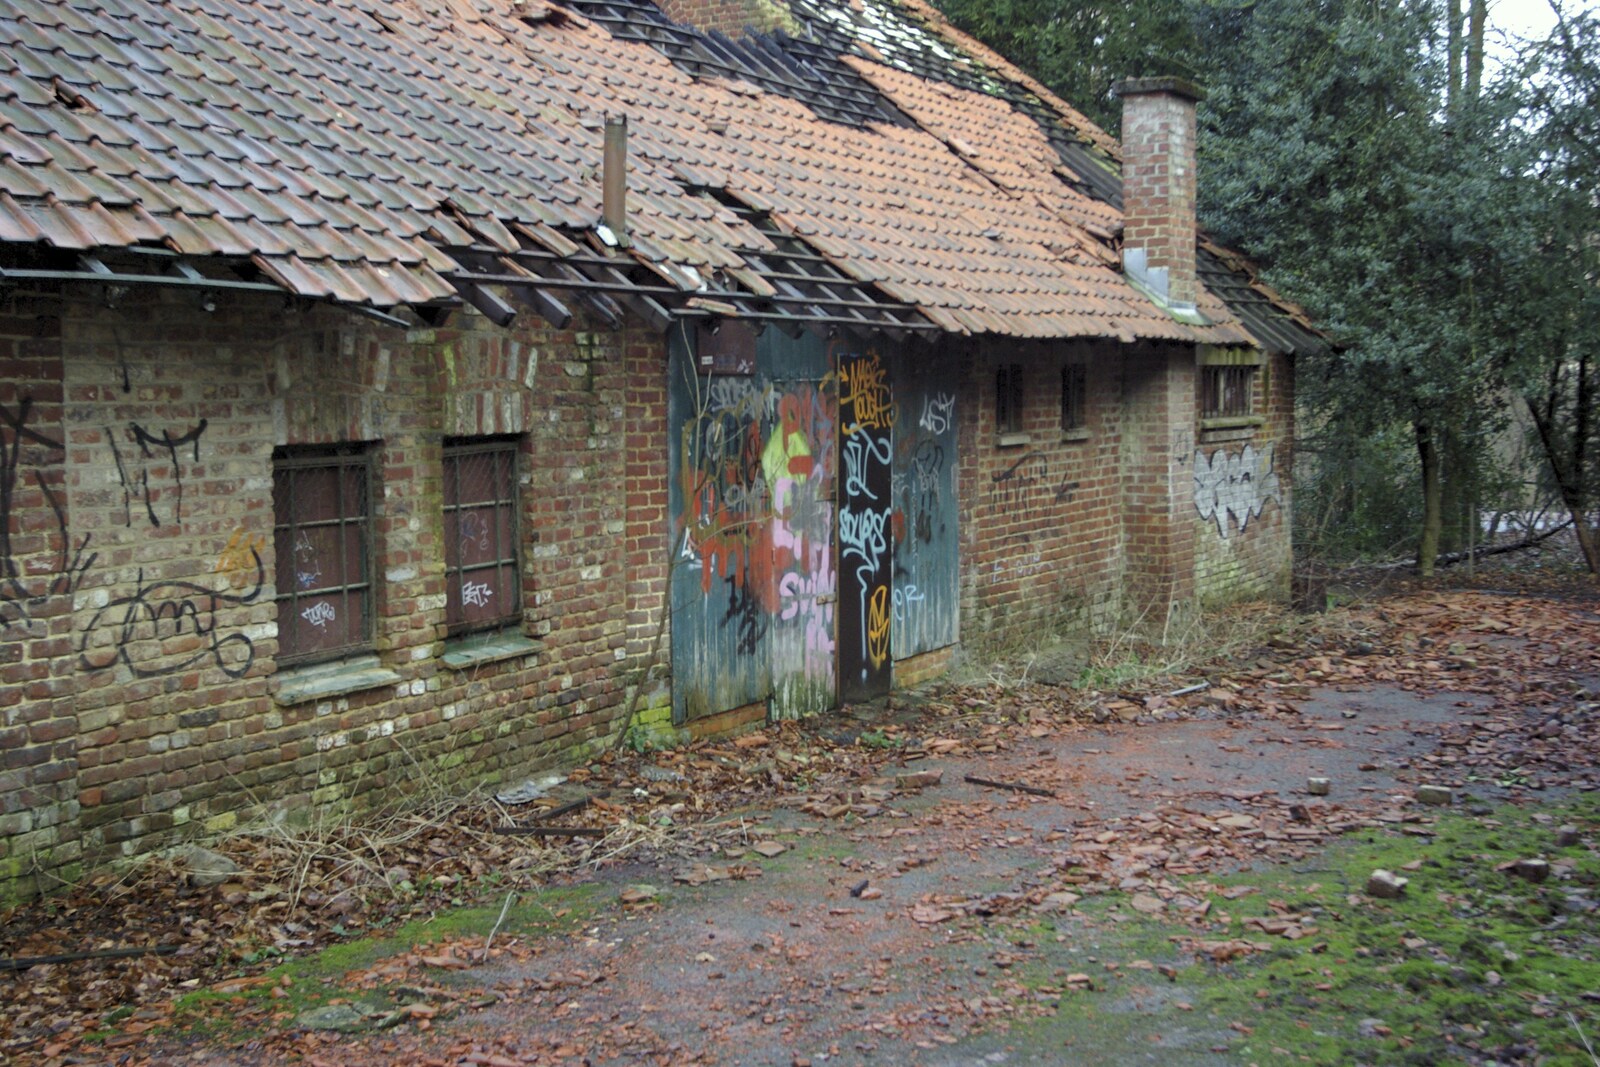 Derelict building and graffiti from The Christmas Markets of Brussels, Belgium - 1st January 2007